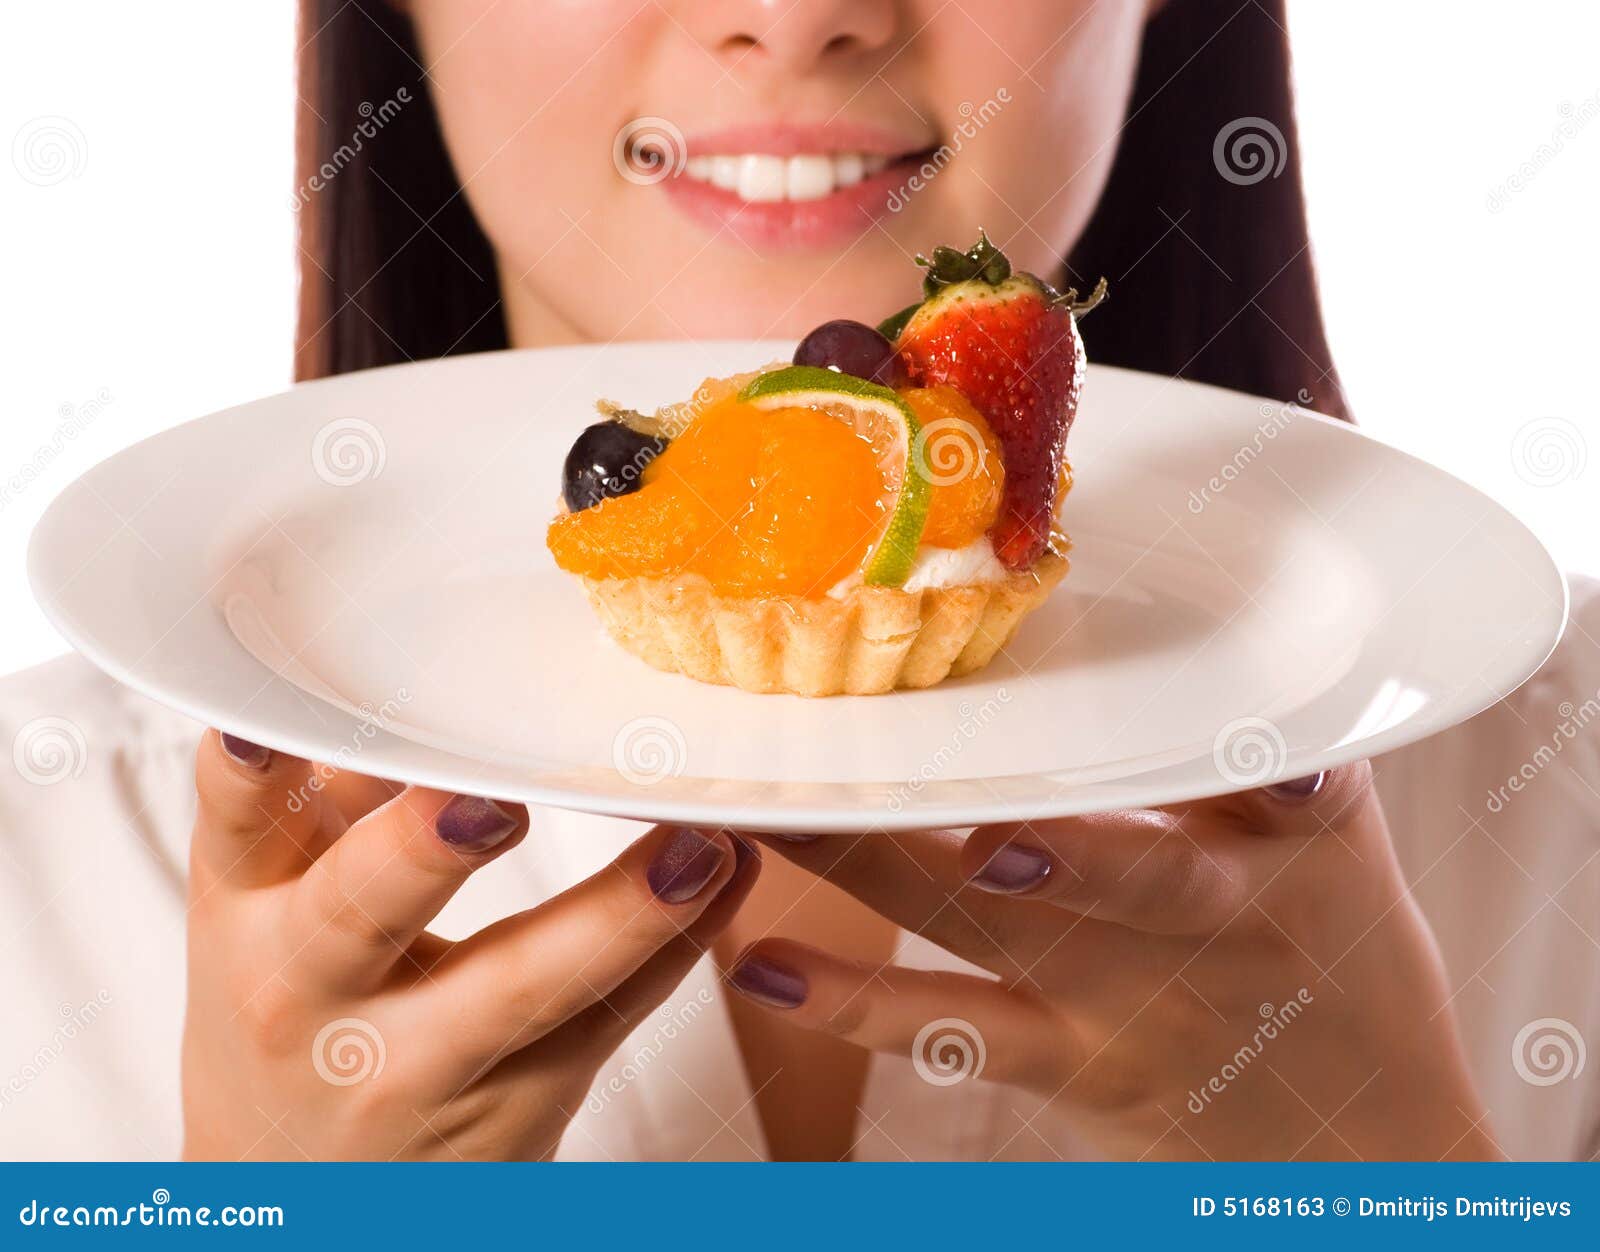 young woman with low-calorie fruit cake